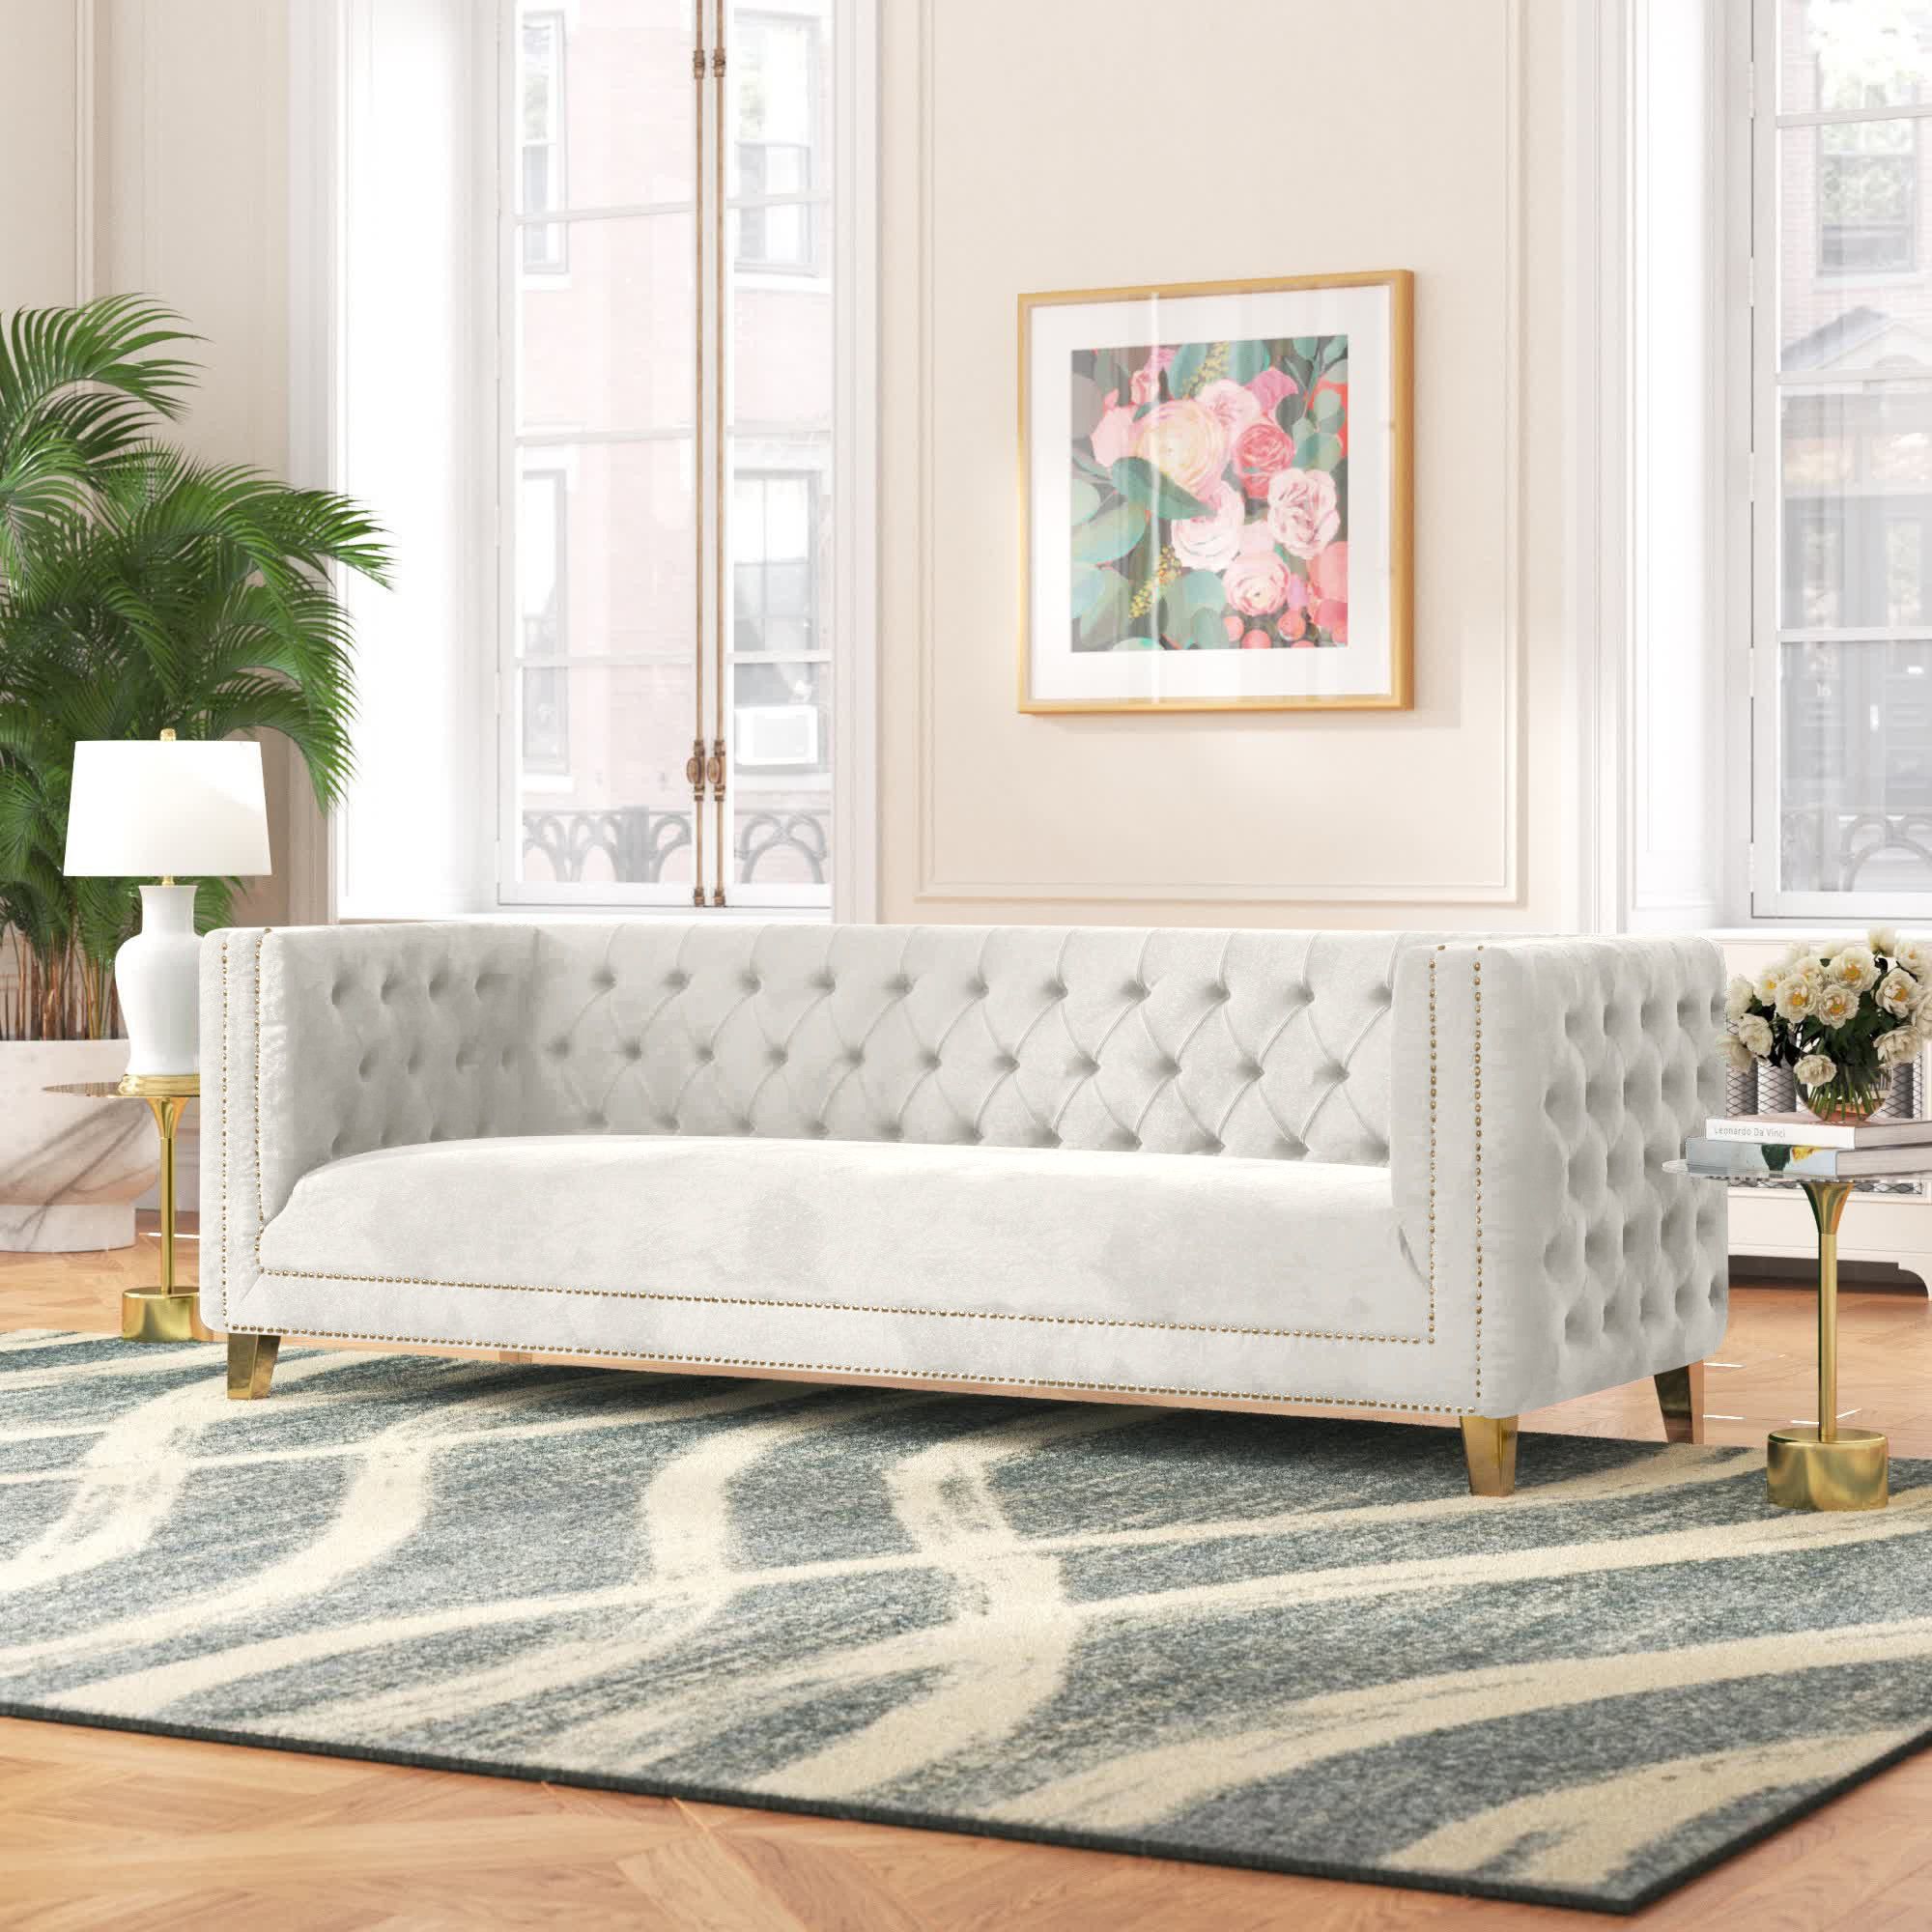 Willa Arlo Interiors Sickels 90'' Upholstered Sofa & Reviews | Wayfair Throughout Tufted Upholstered Sofas (View 4 of 15)